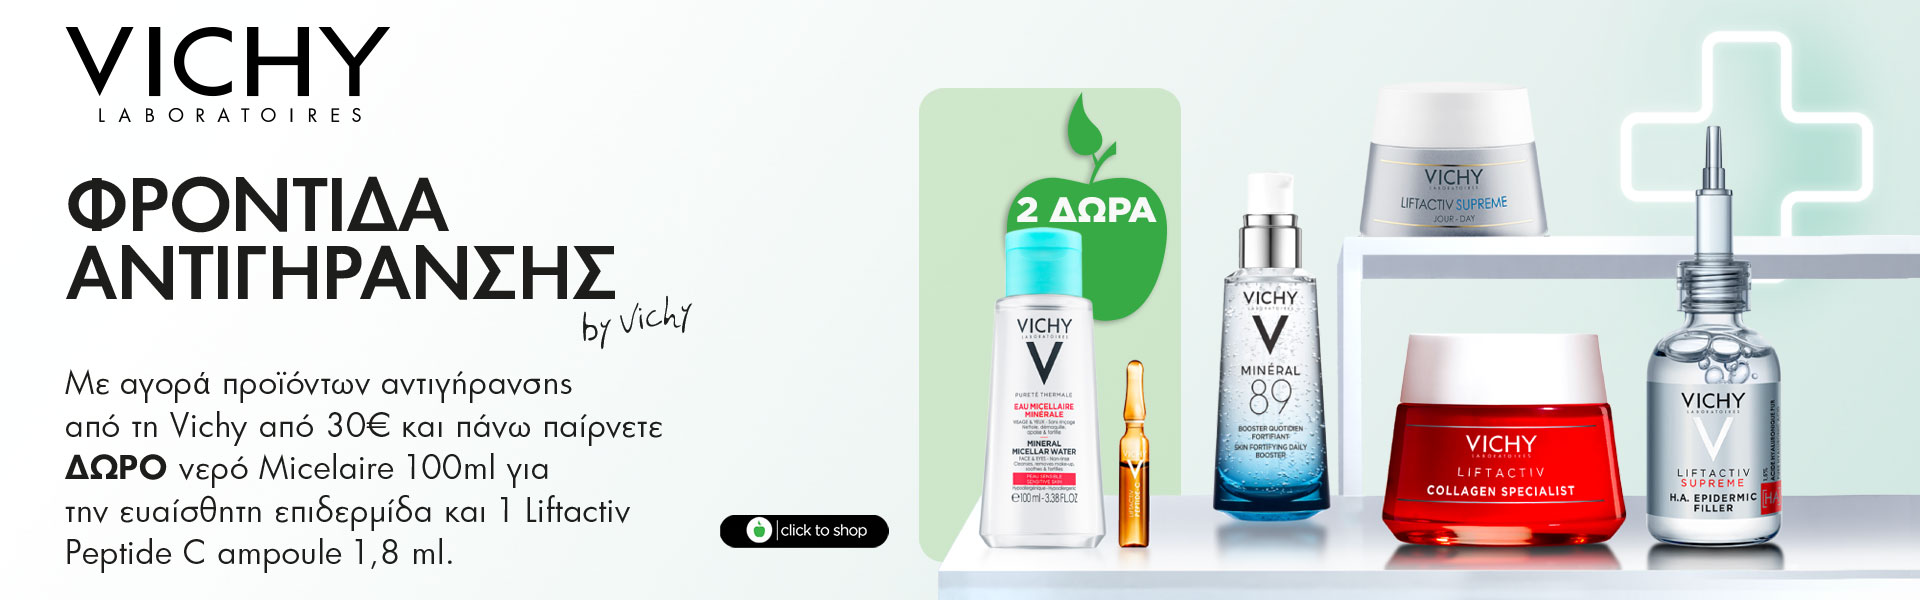 Vichy antiage Septembers gifts